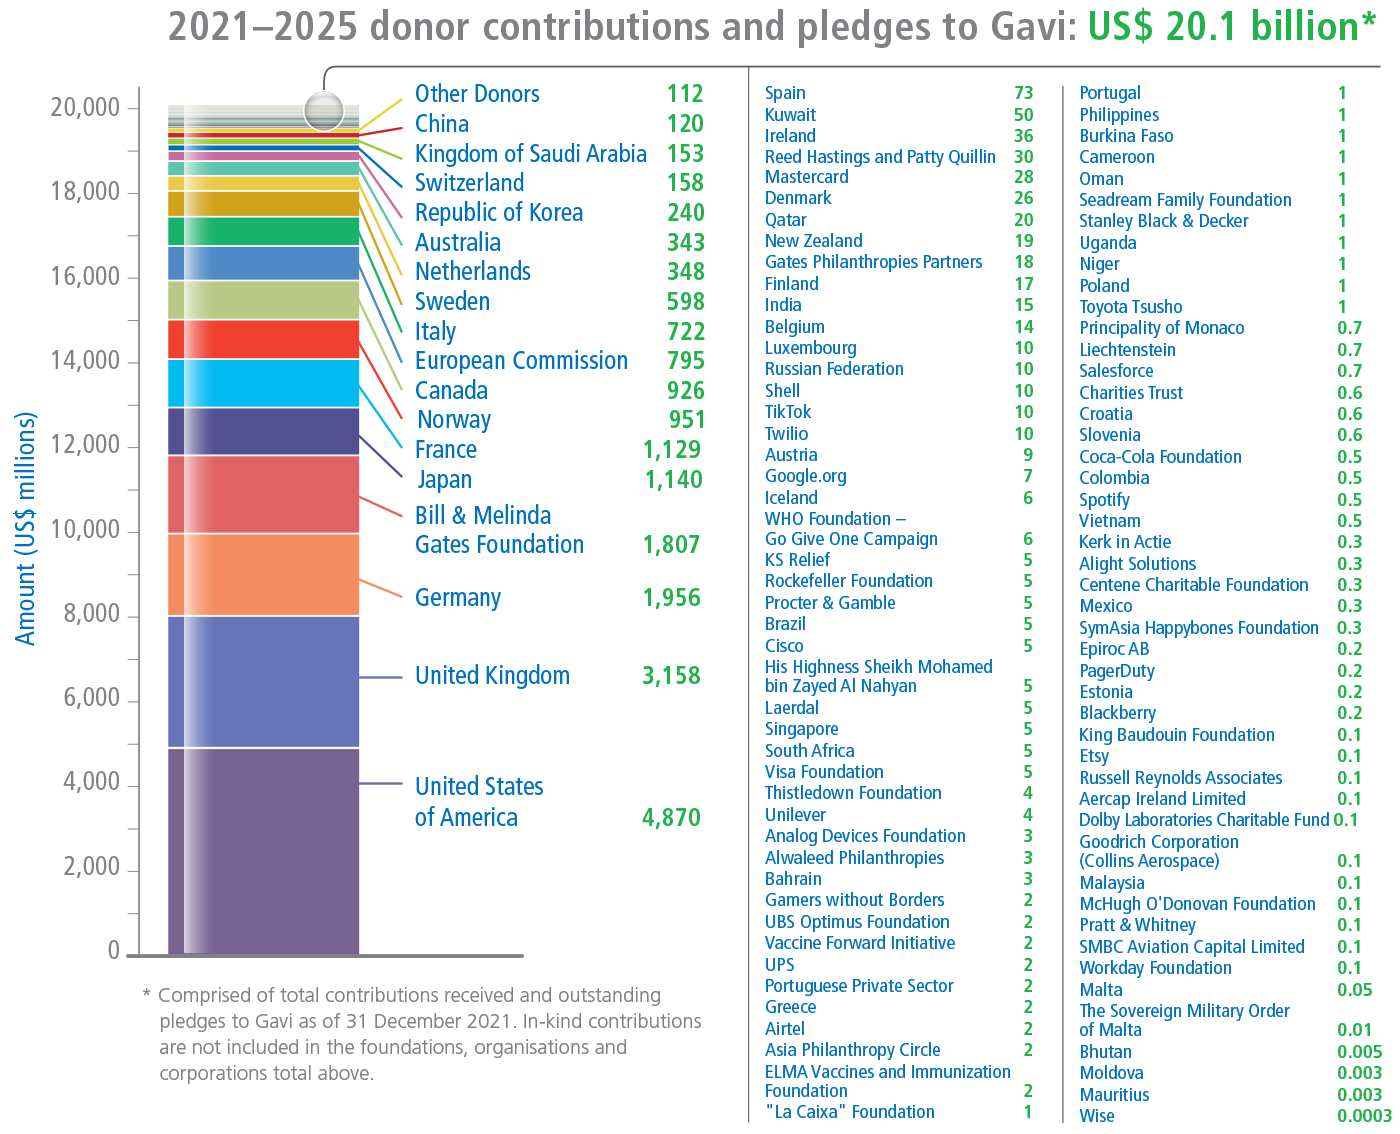 Donor contributions: 2021-2025